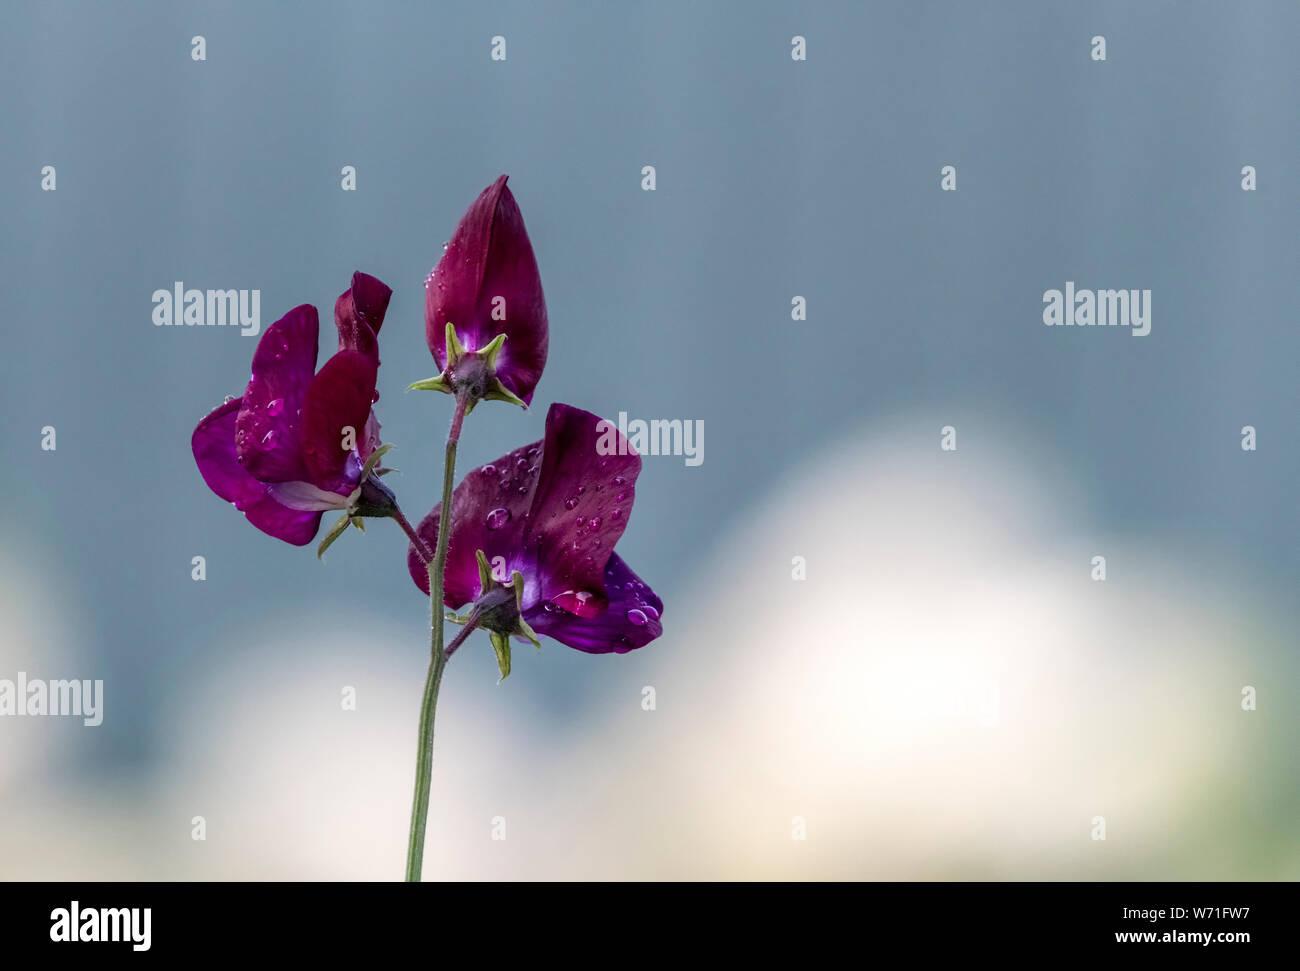 Plum coloured Sweet Pea flowers against an out of focus background Stock Photo